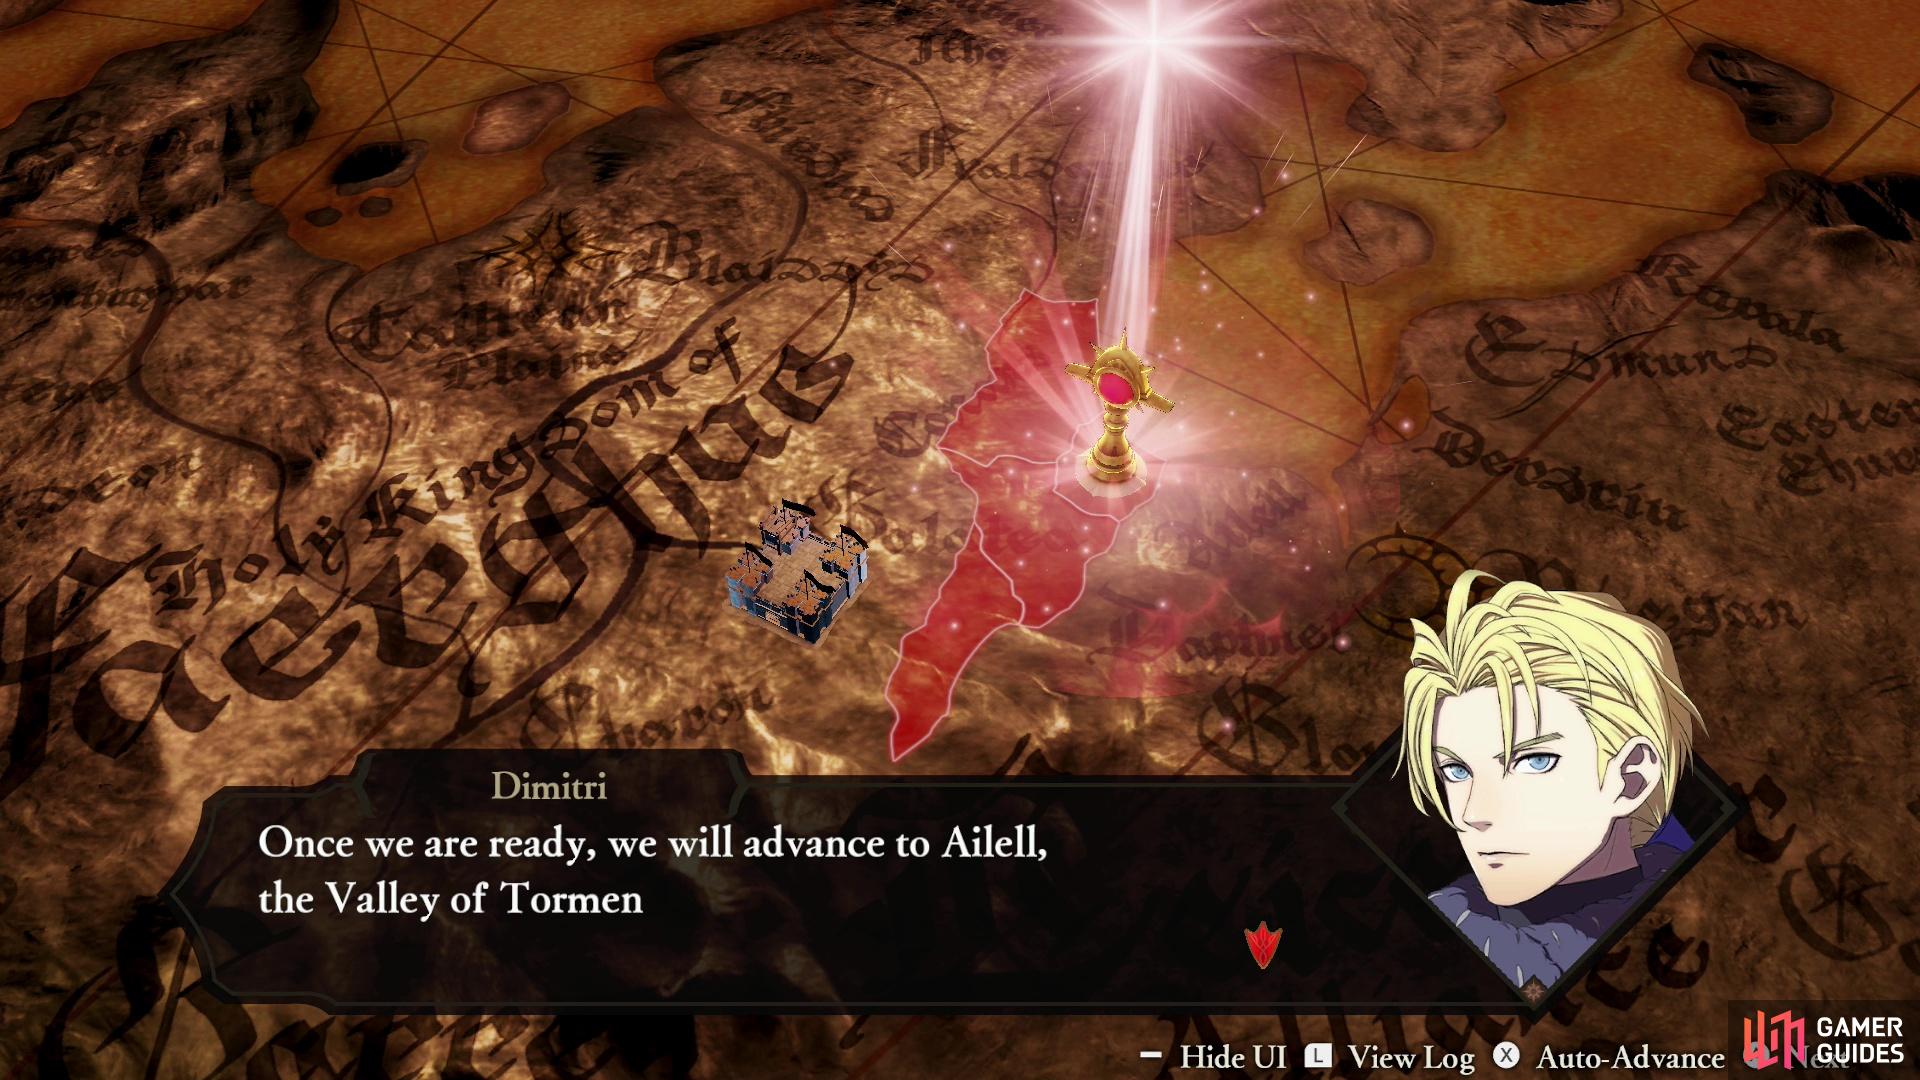 Talk to Dimitri and hell explain the War Map to you,